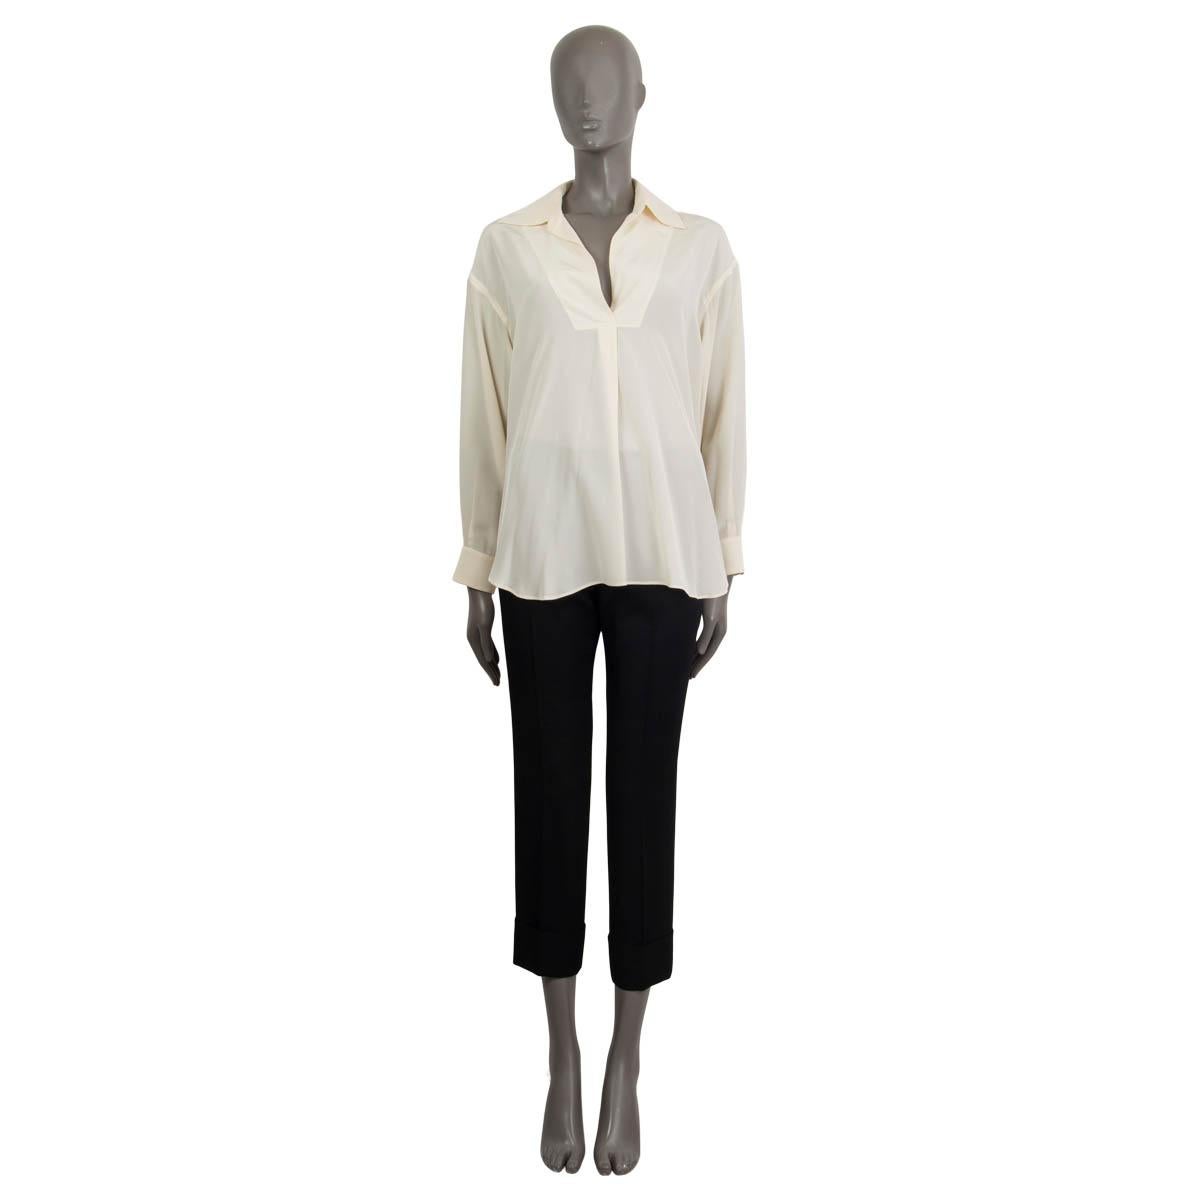 100% authentic Chloé oversized blouse in off-white silk (100%). The lightweight silk exudes a fluid drape. Features a flat wide collar, a deep v-neck, blouson sleeves and buttoned cuffs. Unlined. Has been worn and is in excellent condition.